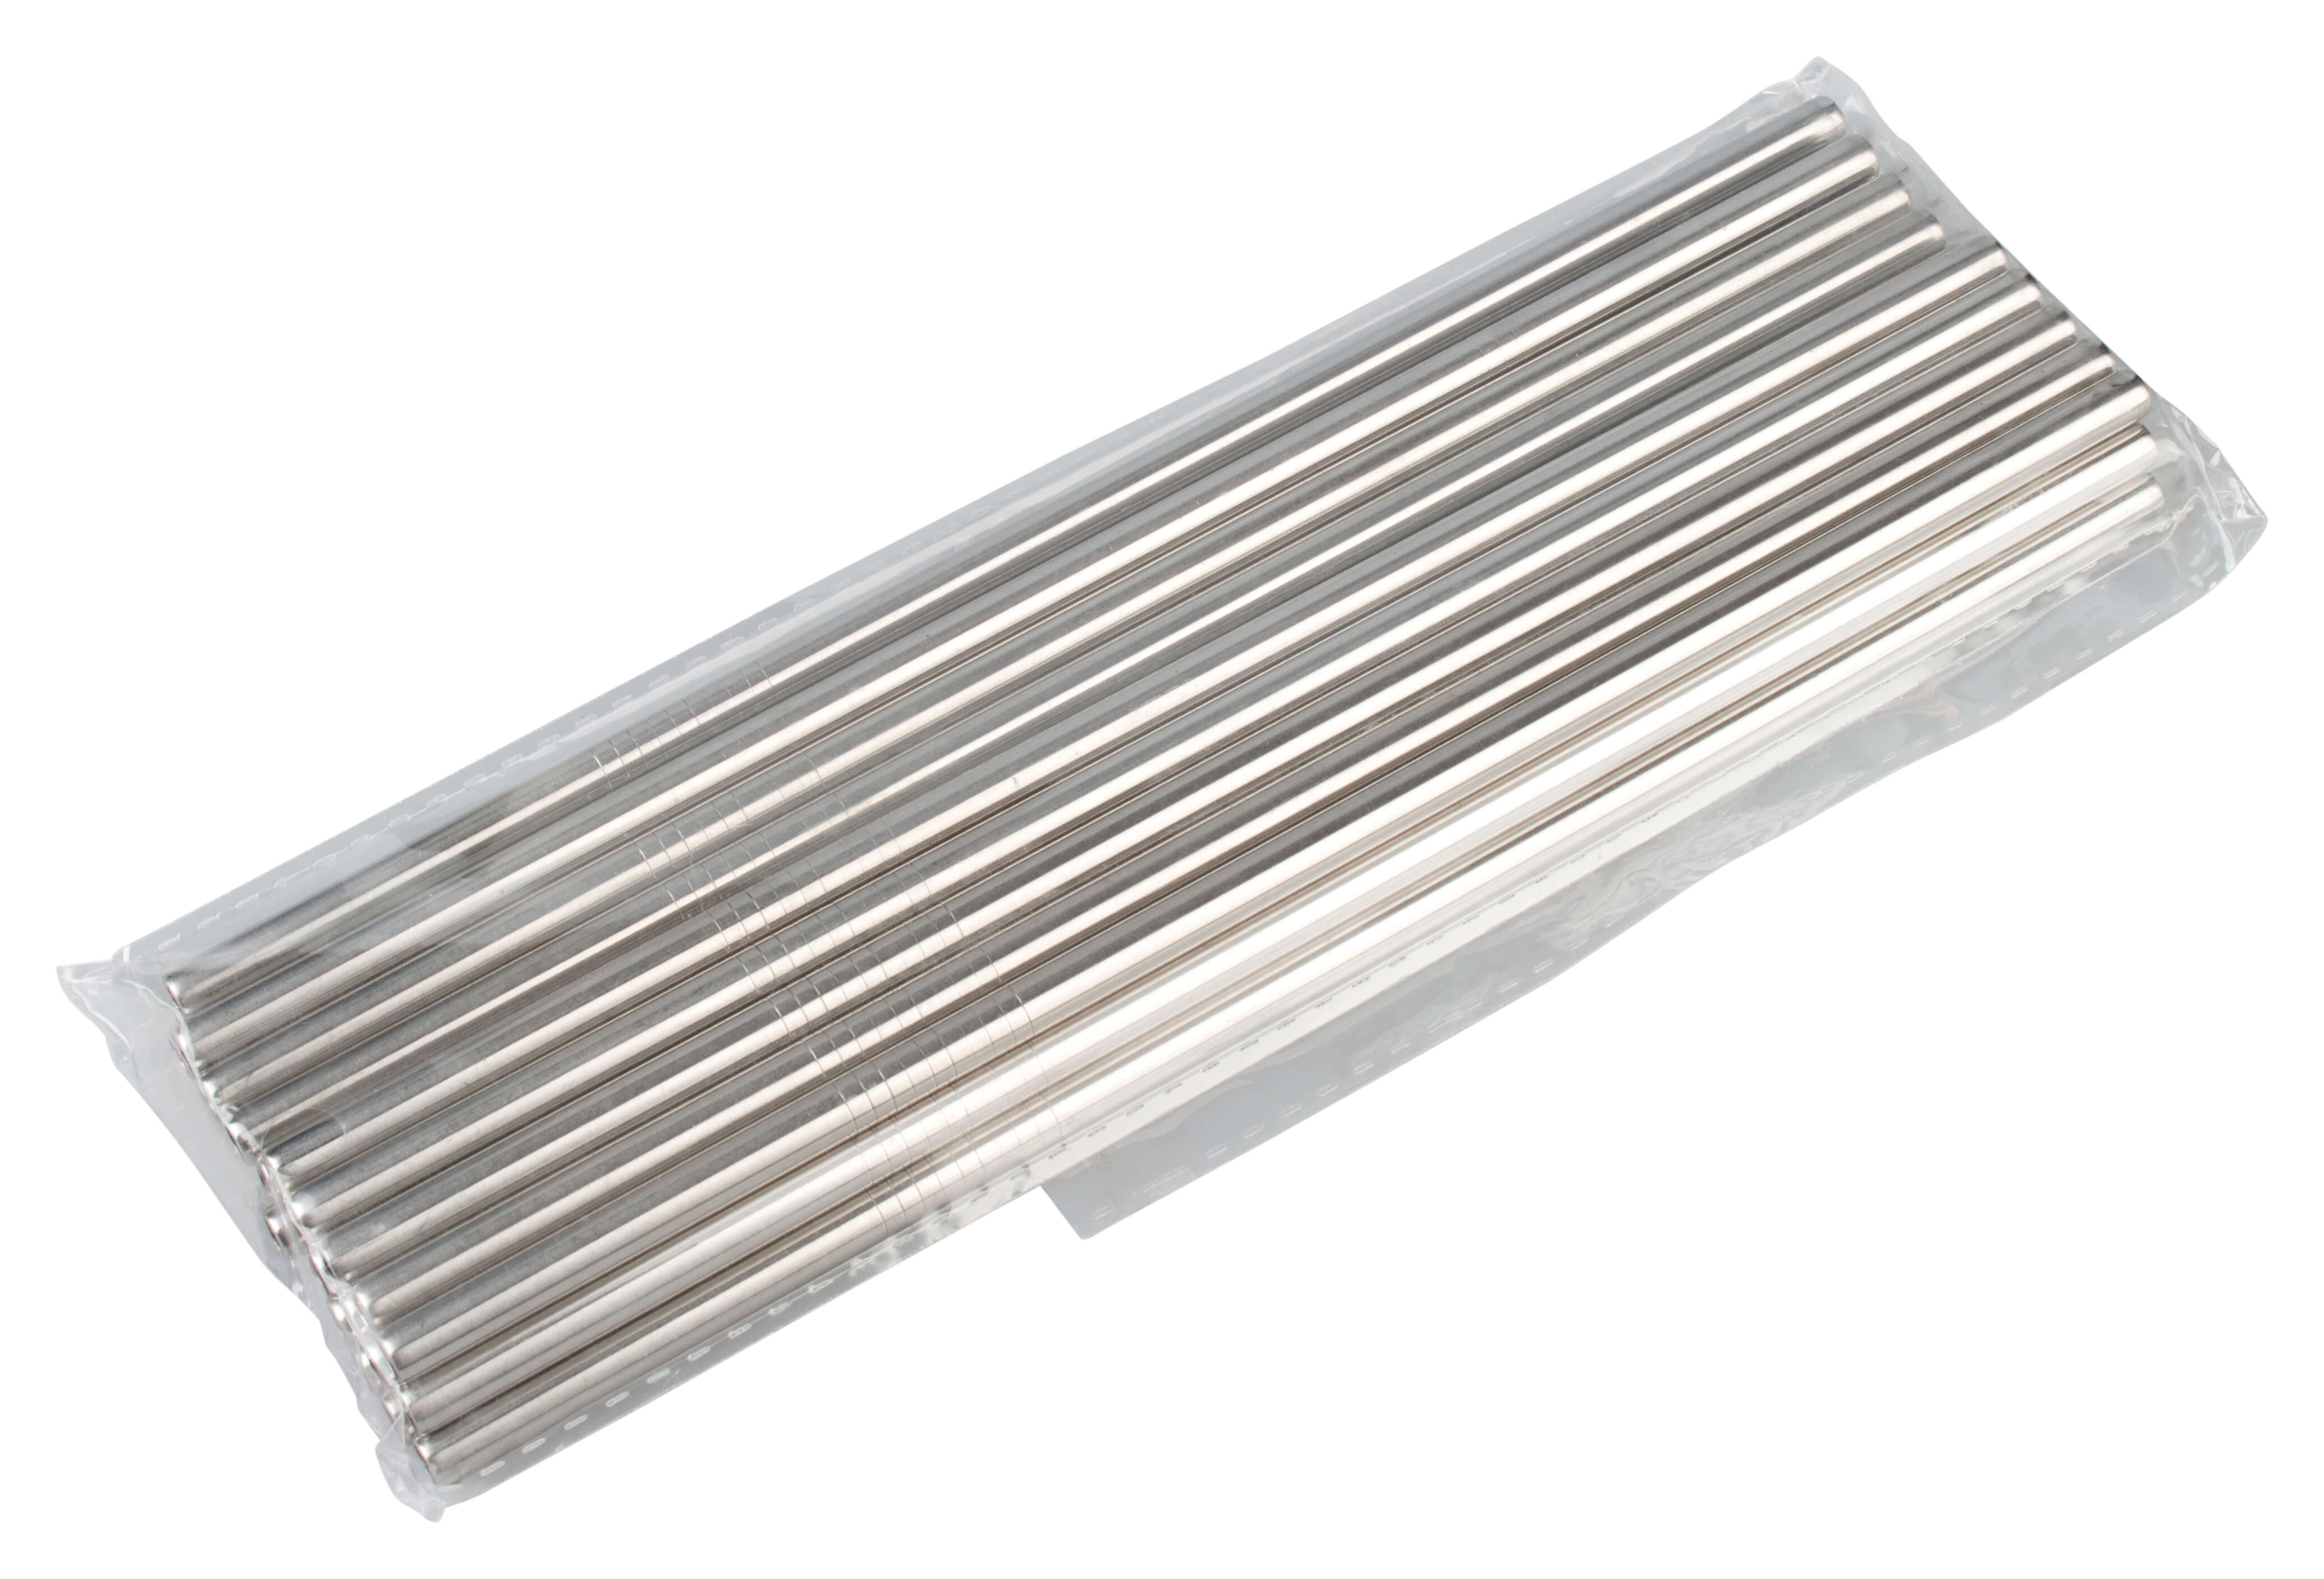 Drinking straws, stainless steel (6x210mm) - 25 pcs.